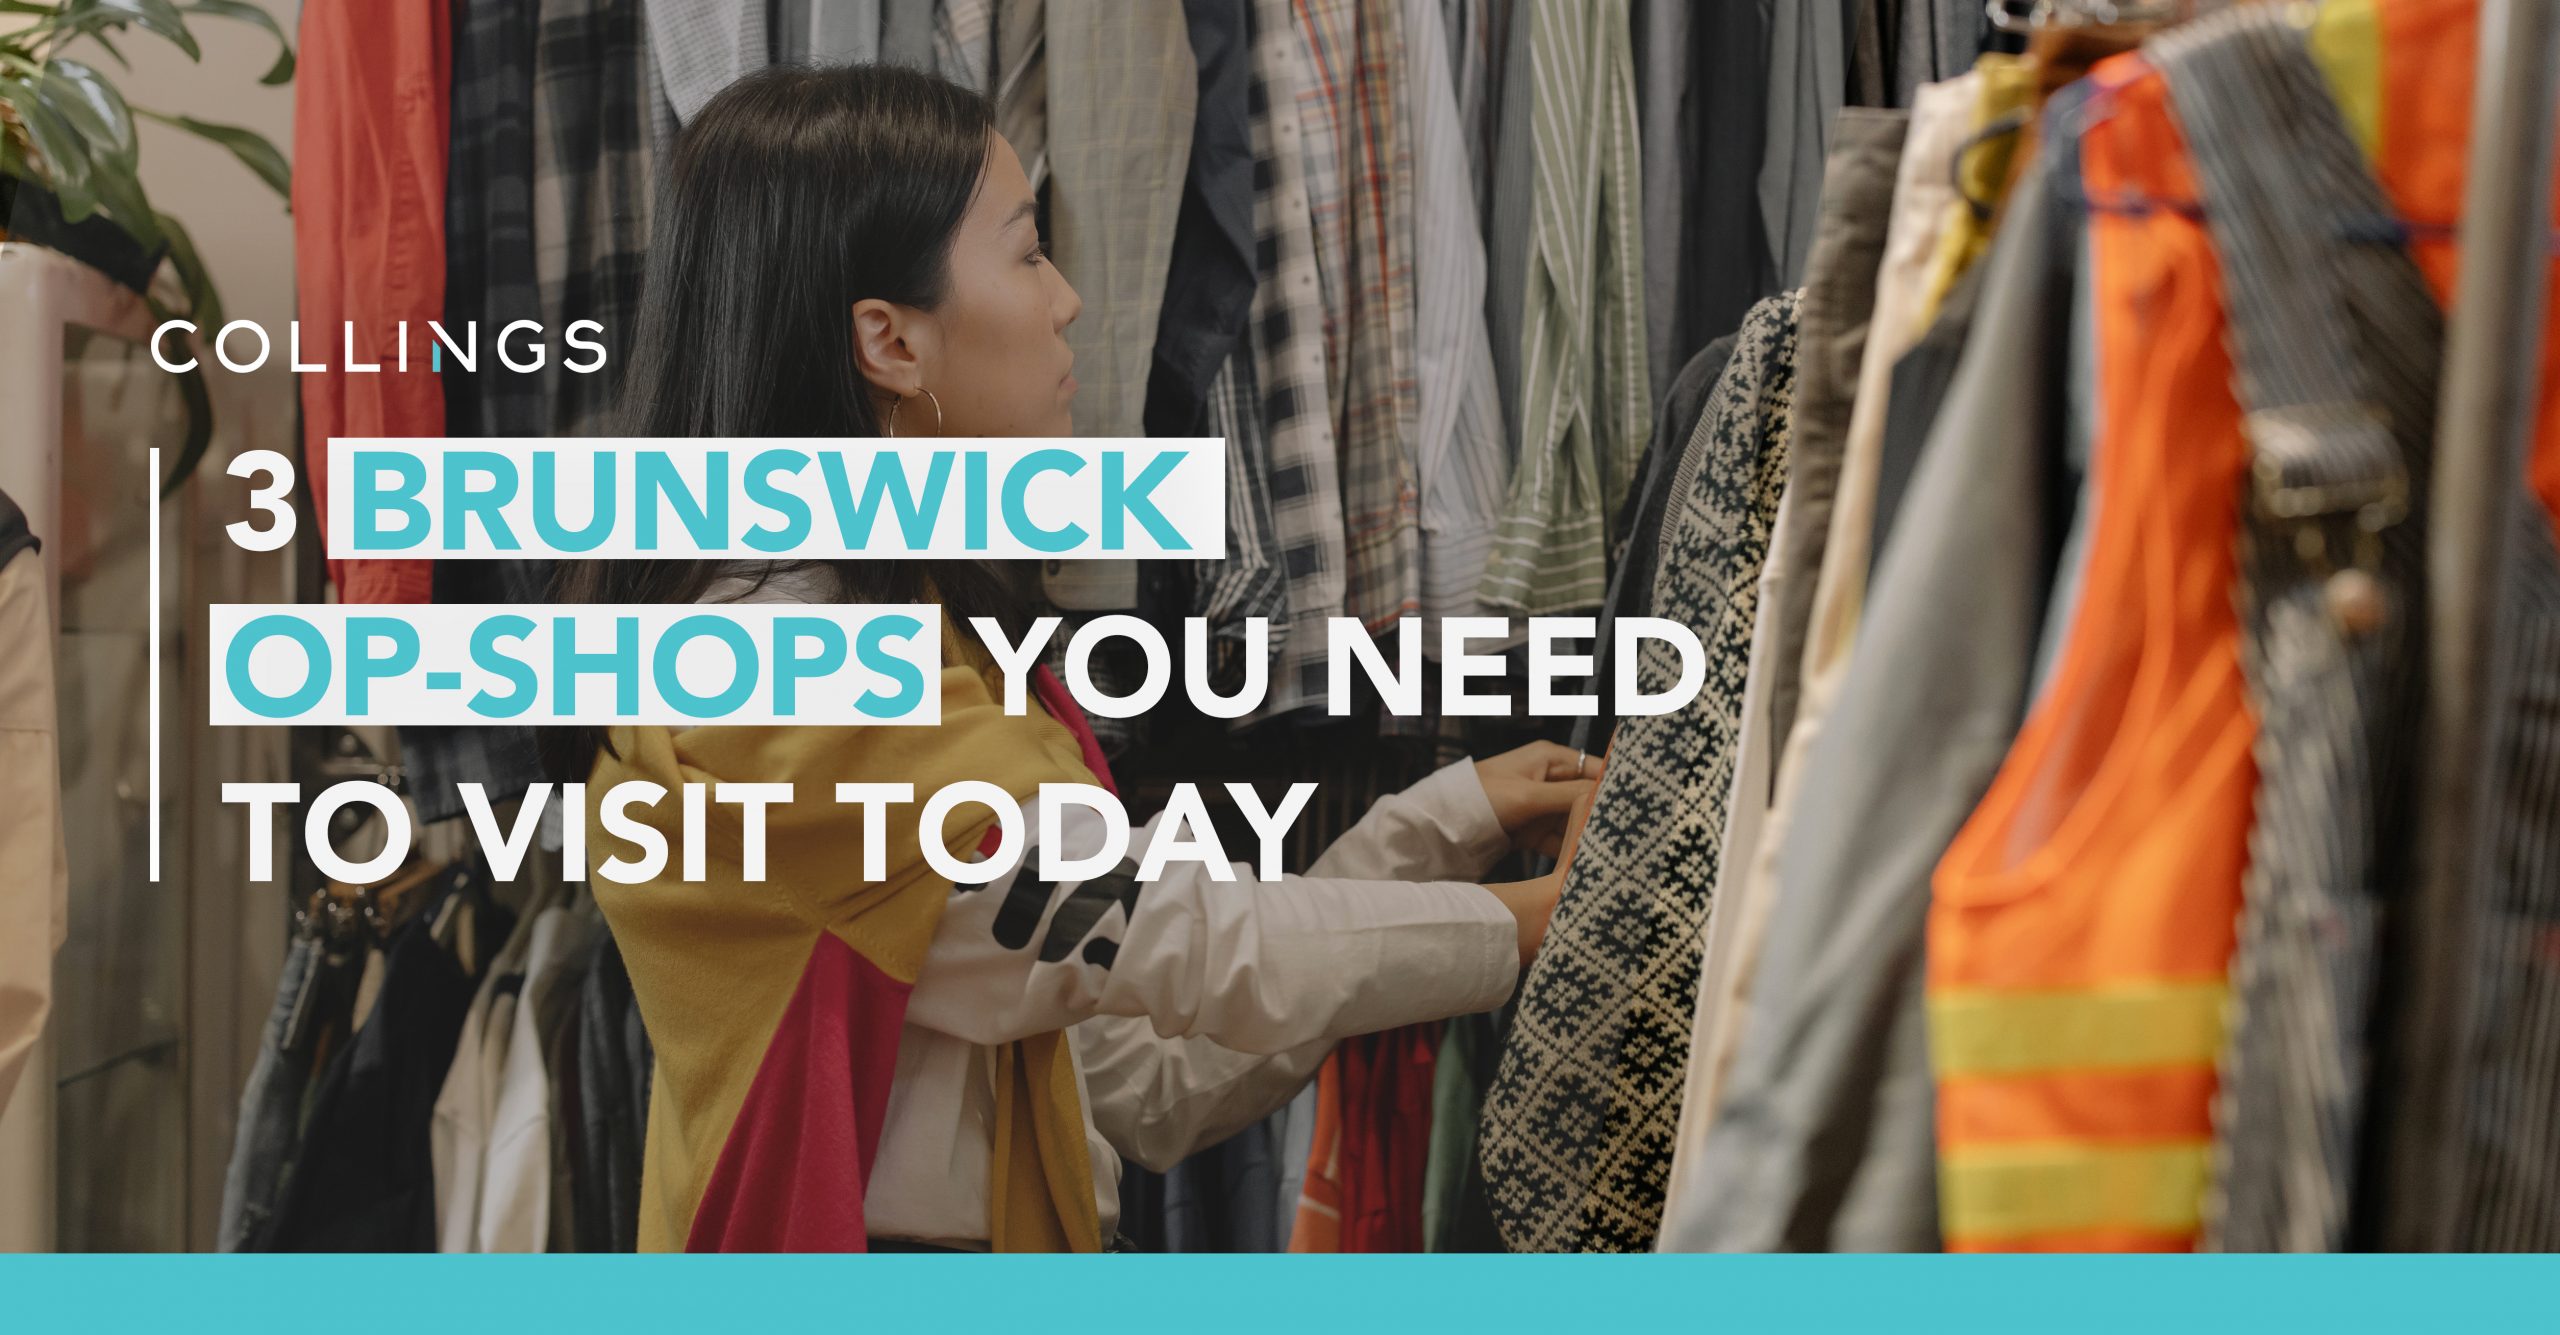 3 Brunswick Op-shops You Need to Visit Today